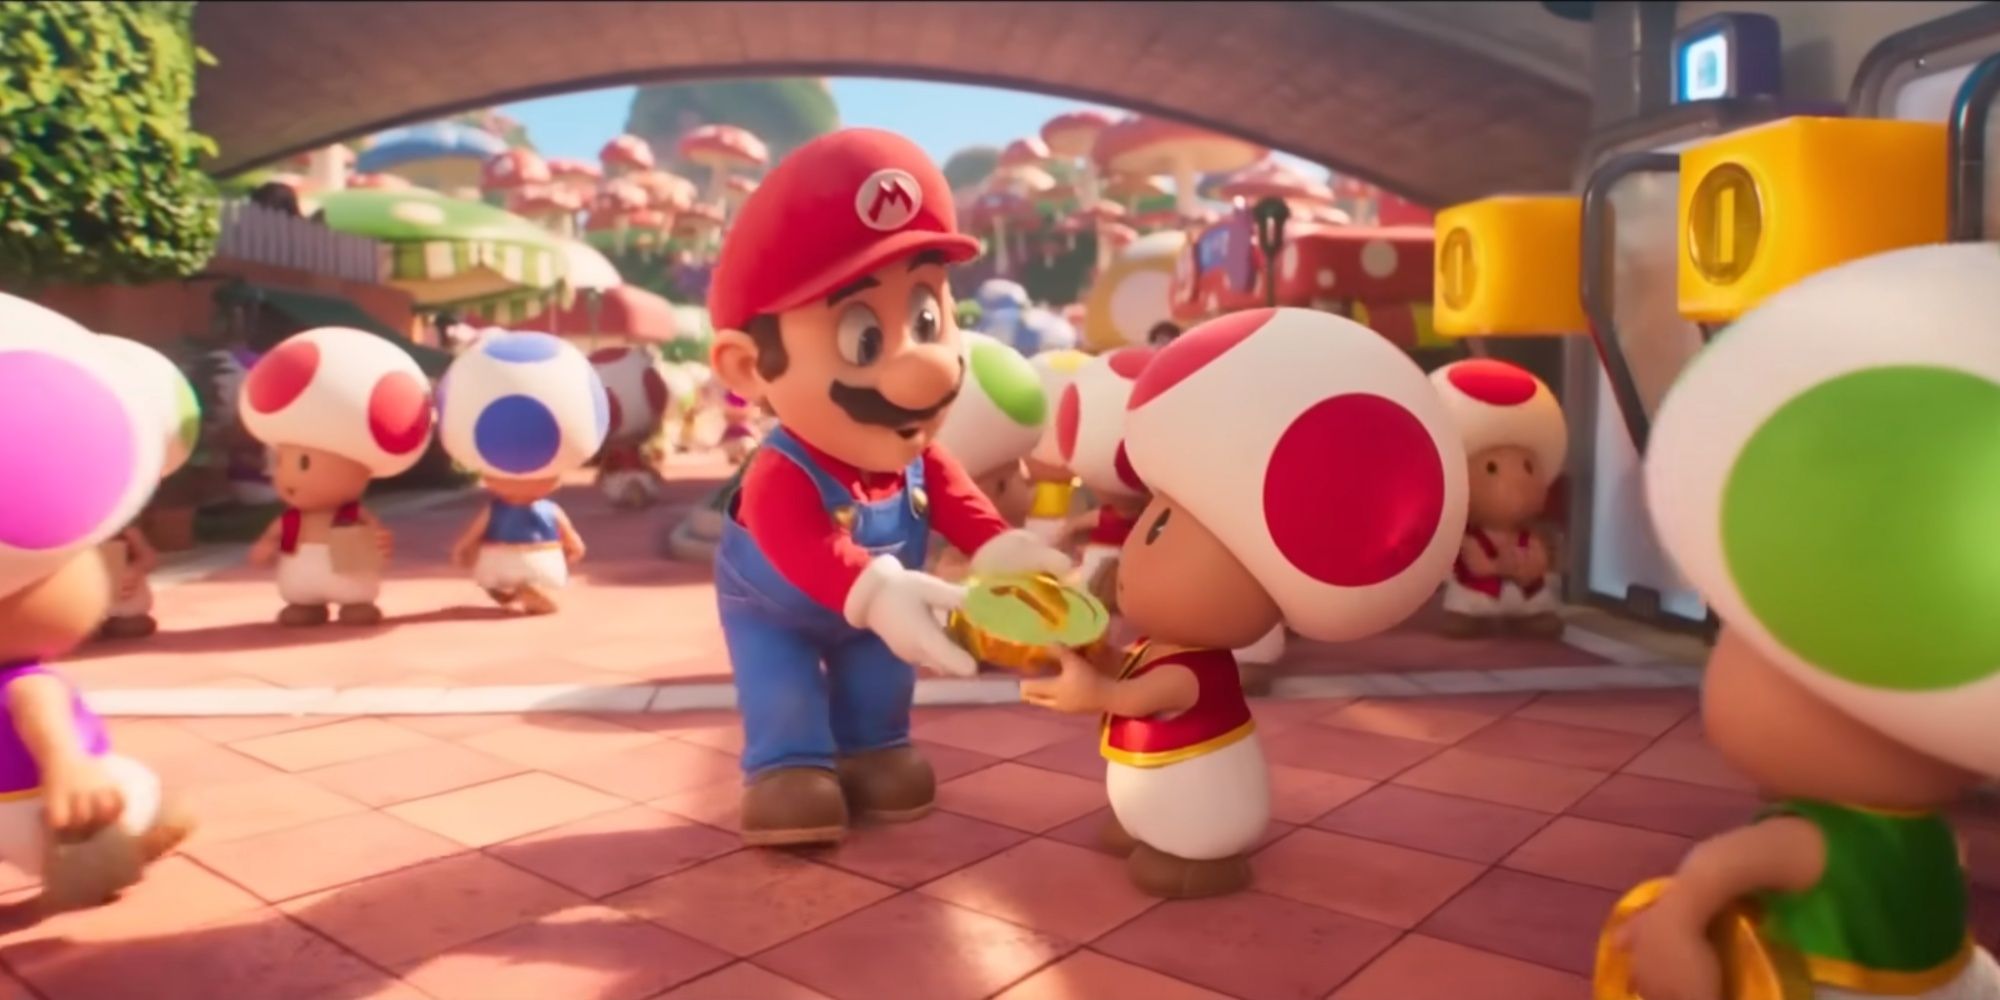 mario giving a red toad a coin in the super mario bros movie